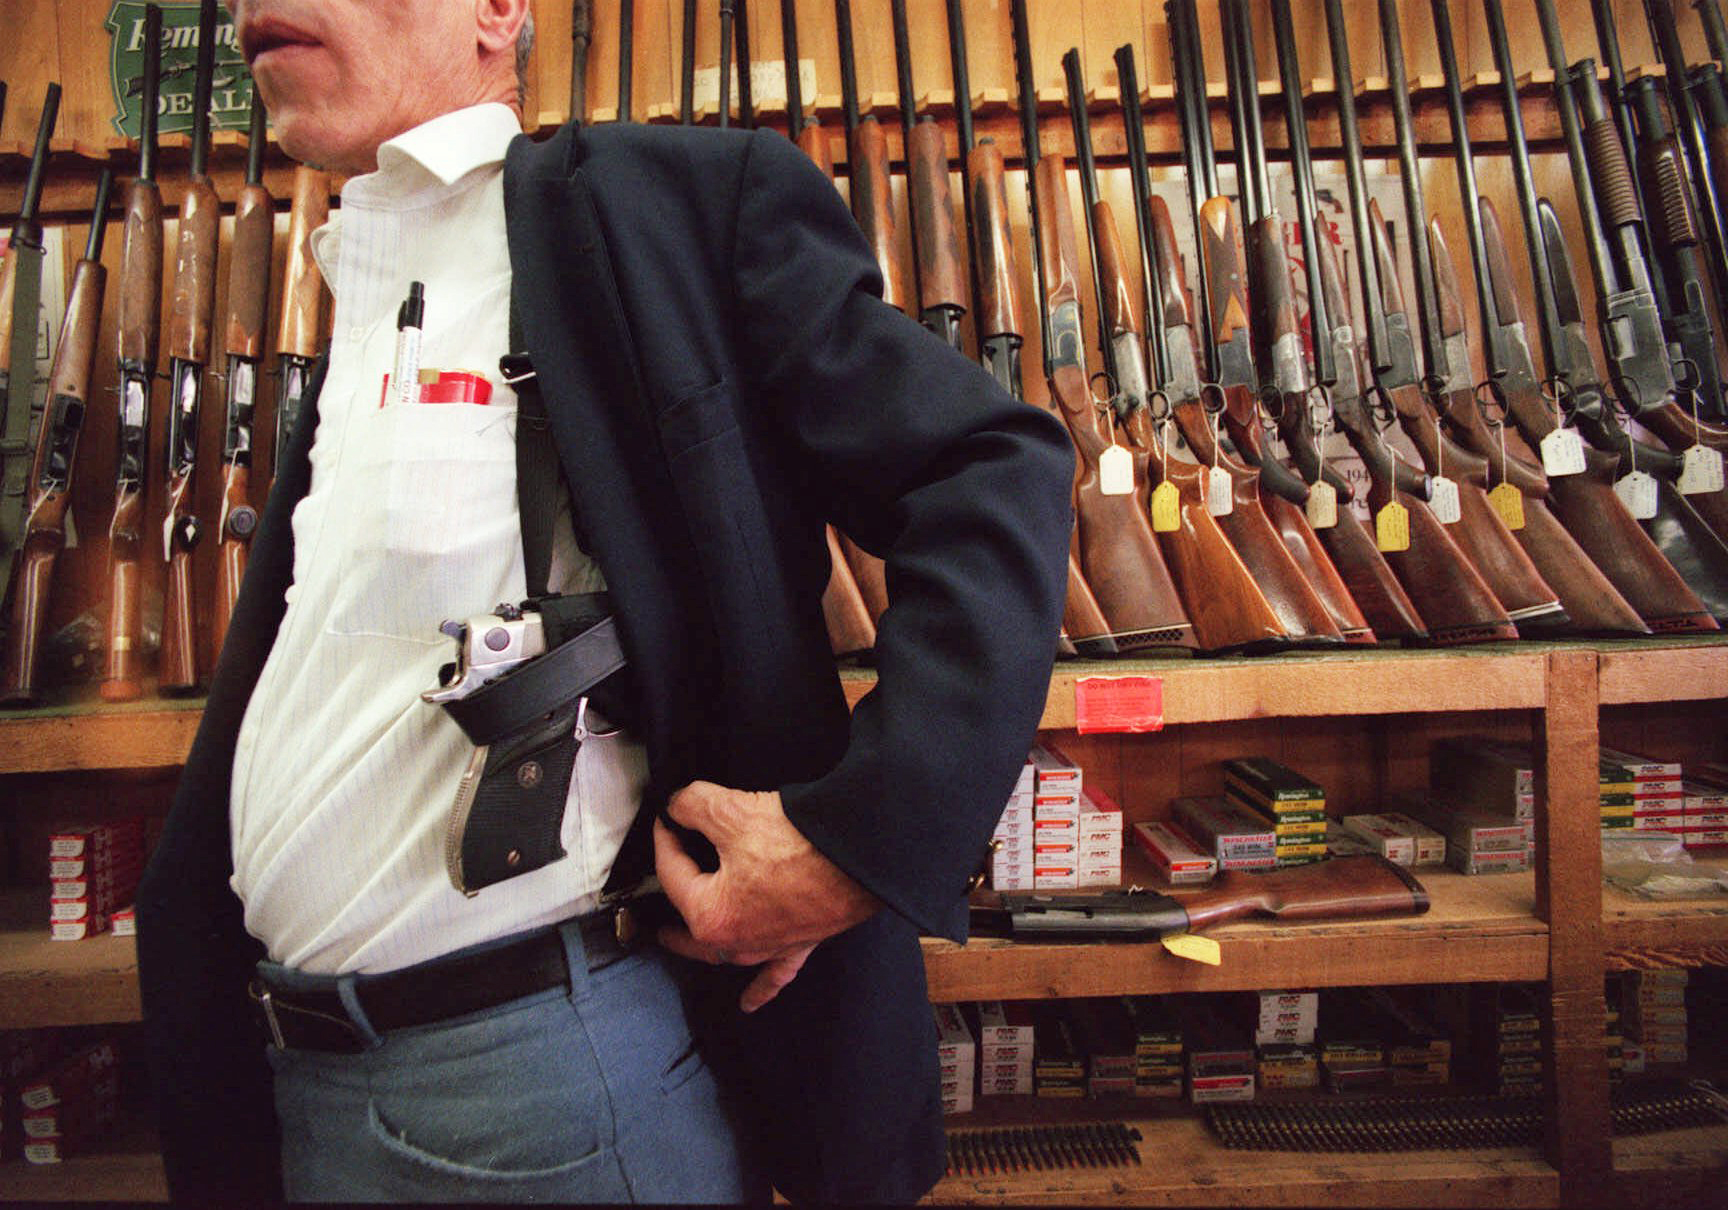 Murder rates drop as concealed carry permits soar: report - Washington Times